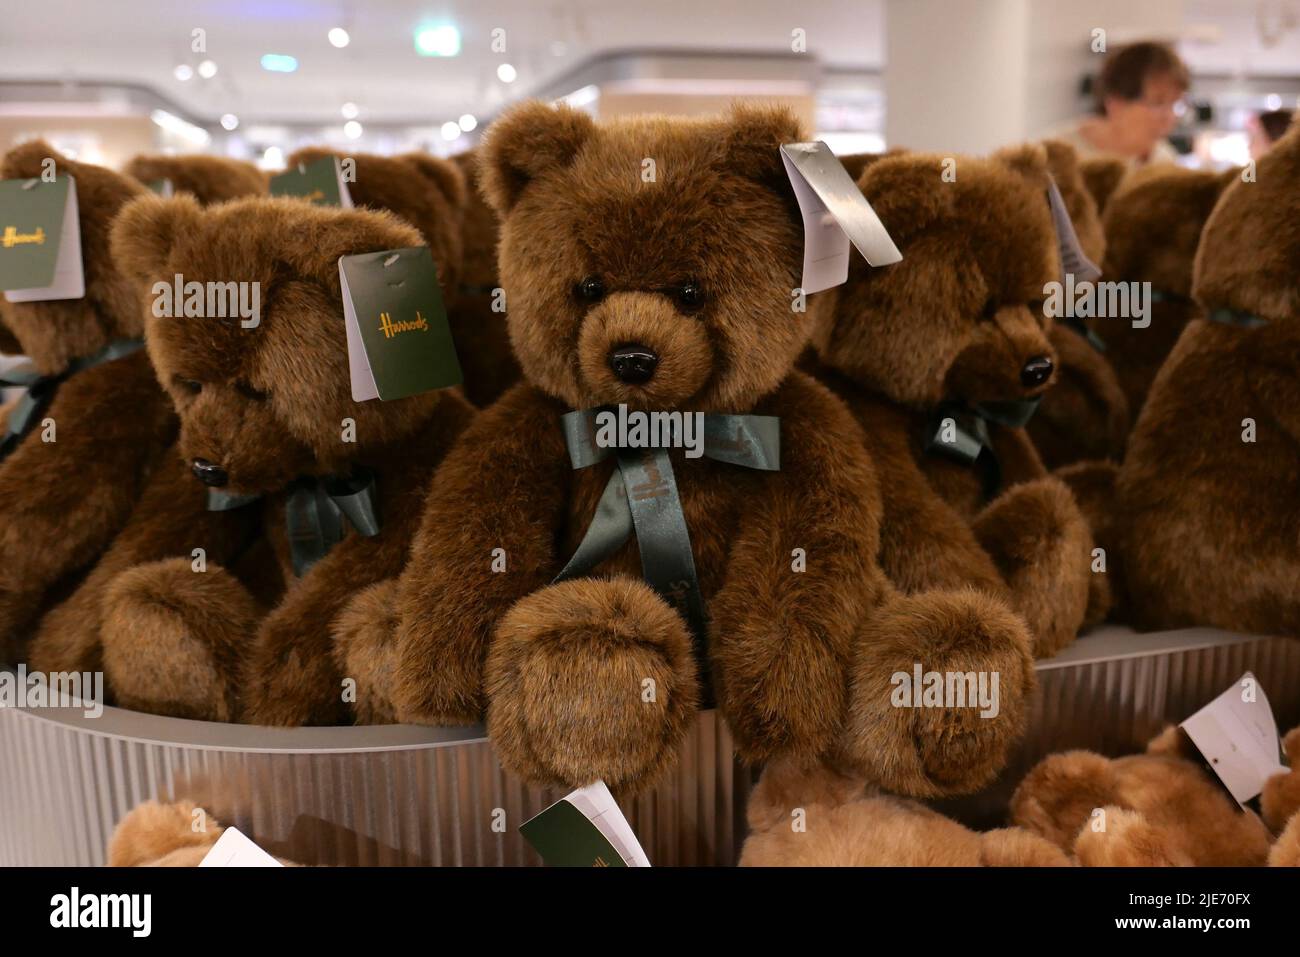 Rs 13 crore to Rs 7 lakh, the world's most expensive teddy bears are here  to haunt you!